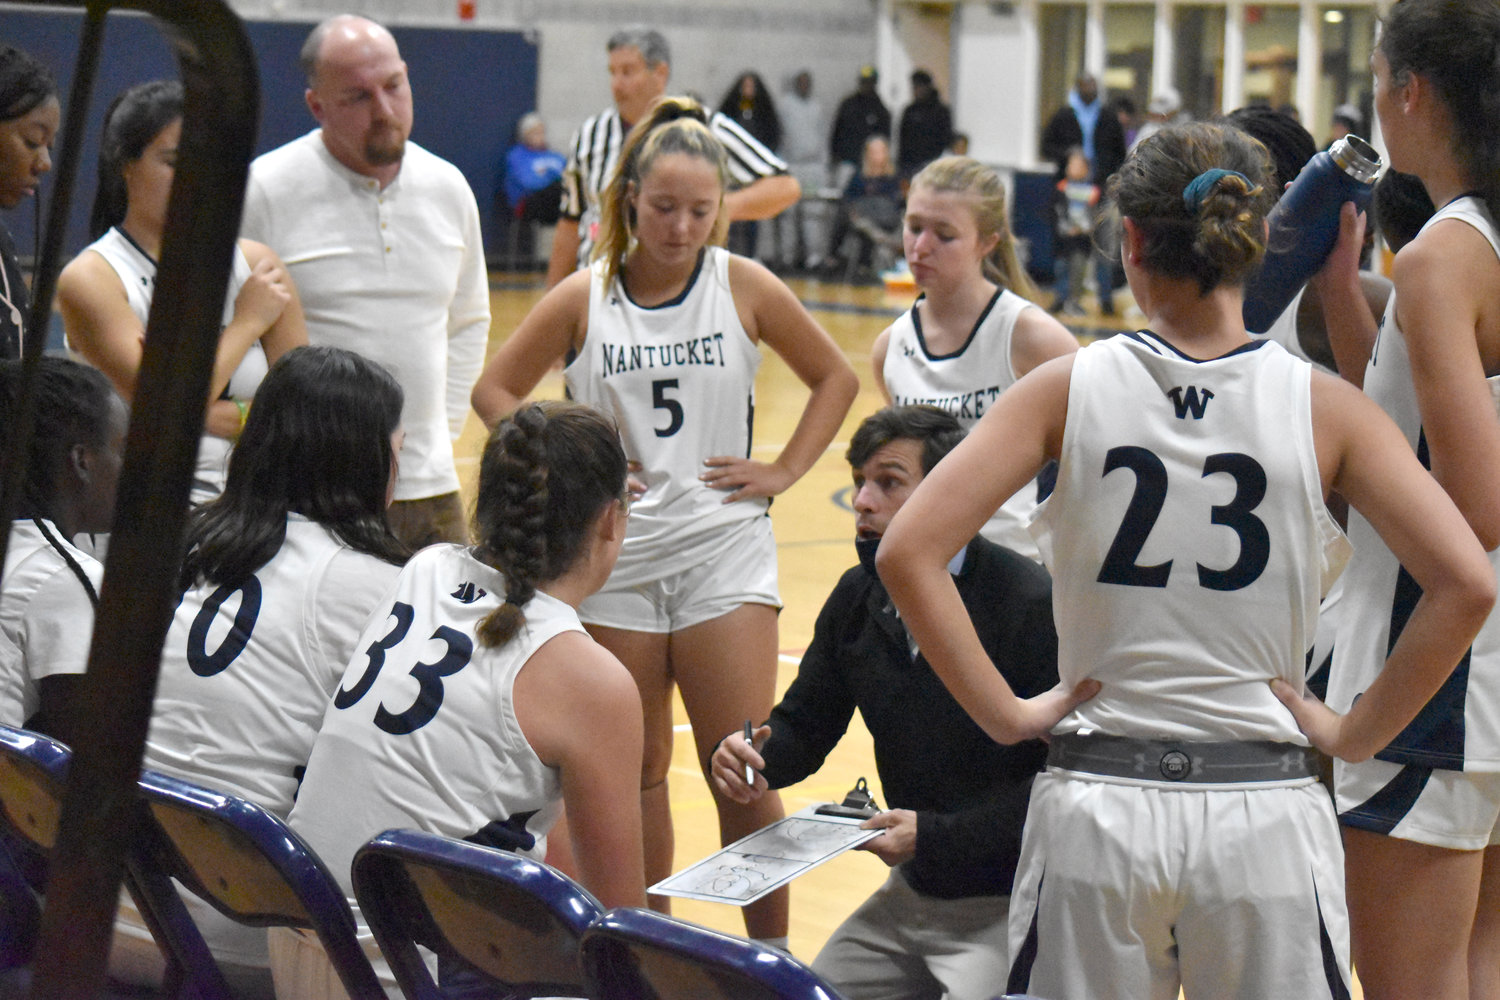 Head coach Raf Osona draws up a play during a timeout in Tuesday’s home opener against Nauset.